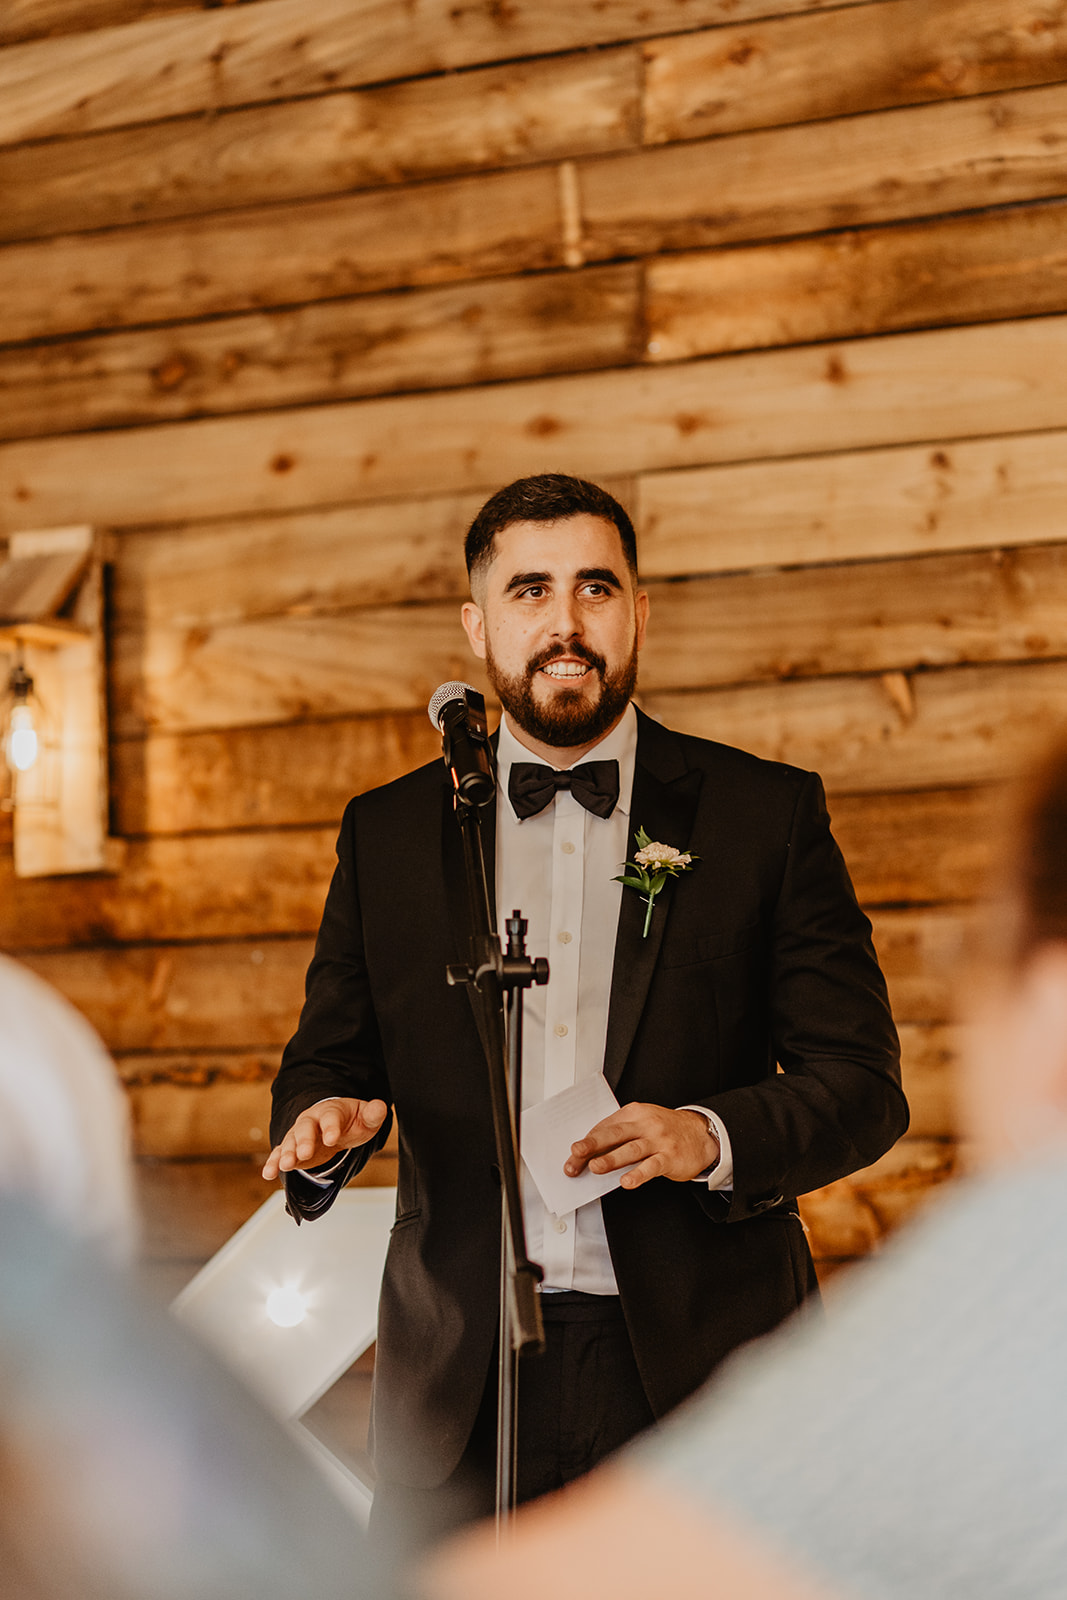 Speeches at a Southlands barn wedding, Sussex. Photo by OliveJoy Photography.